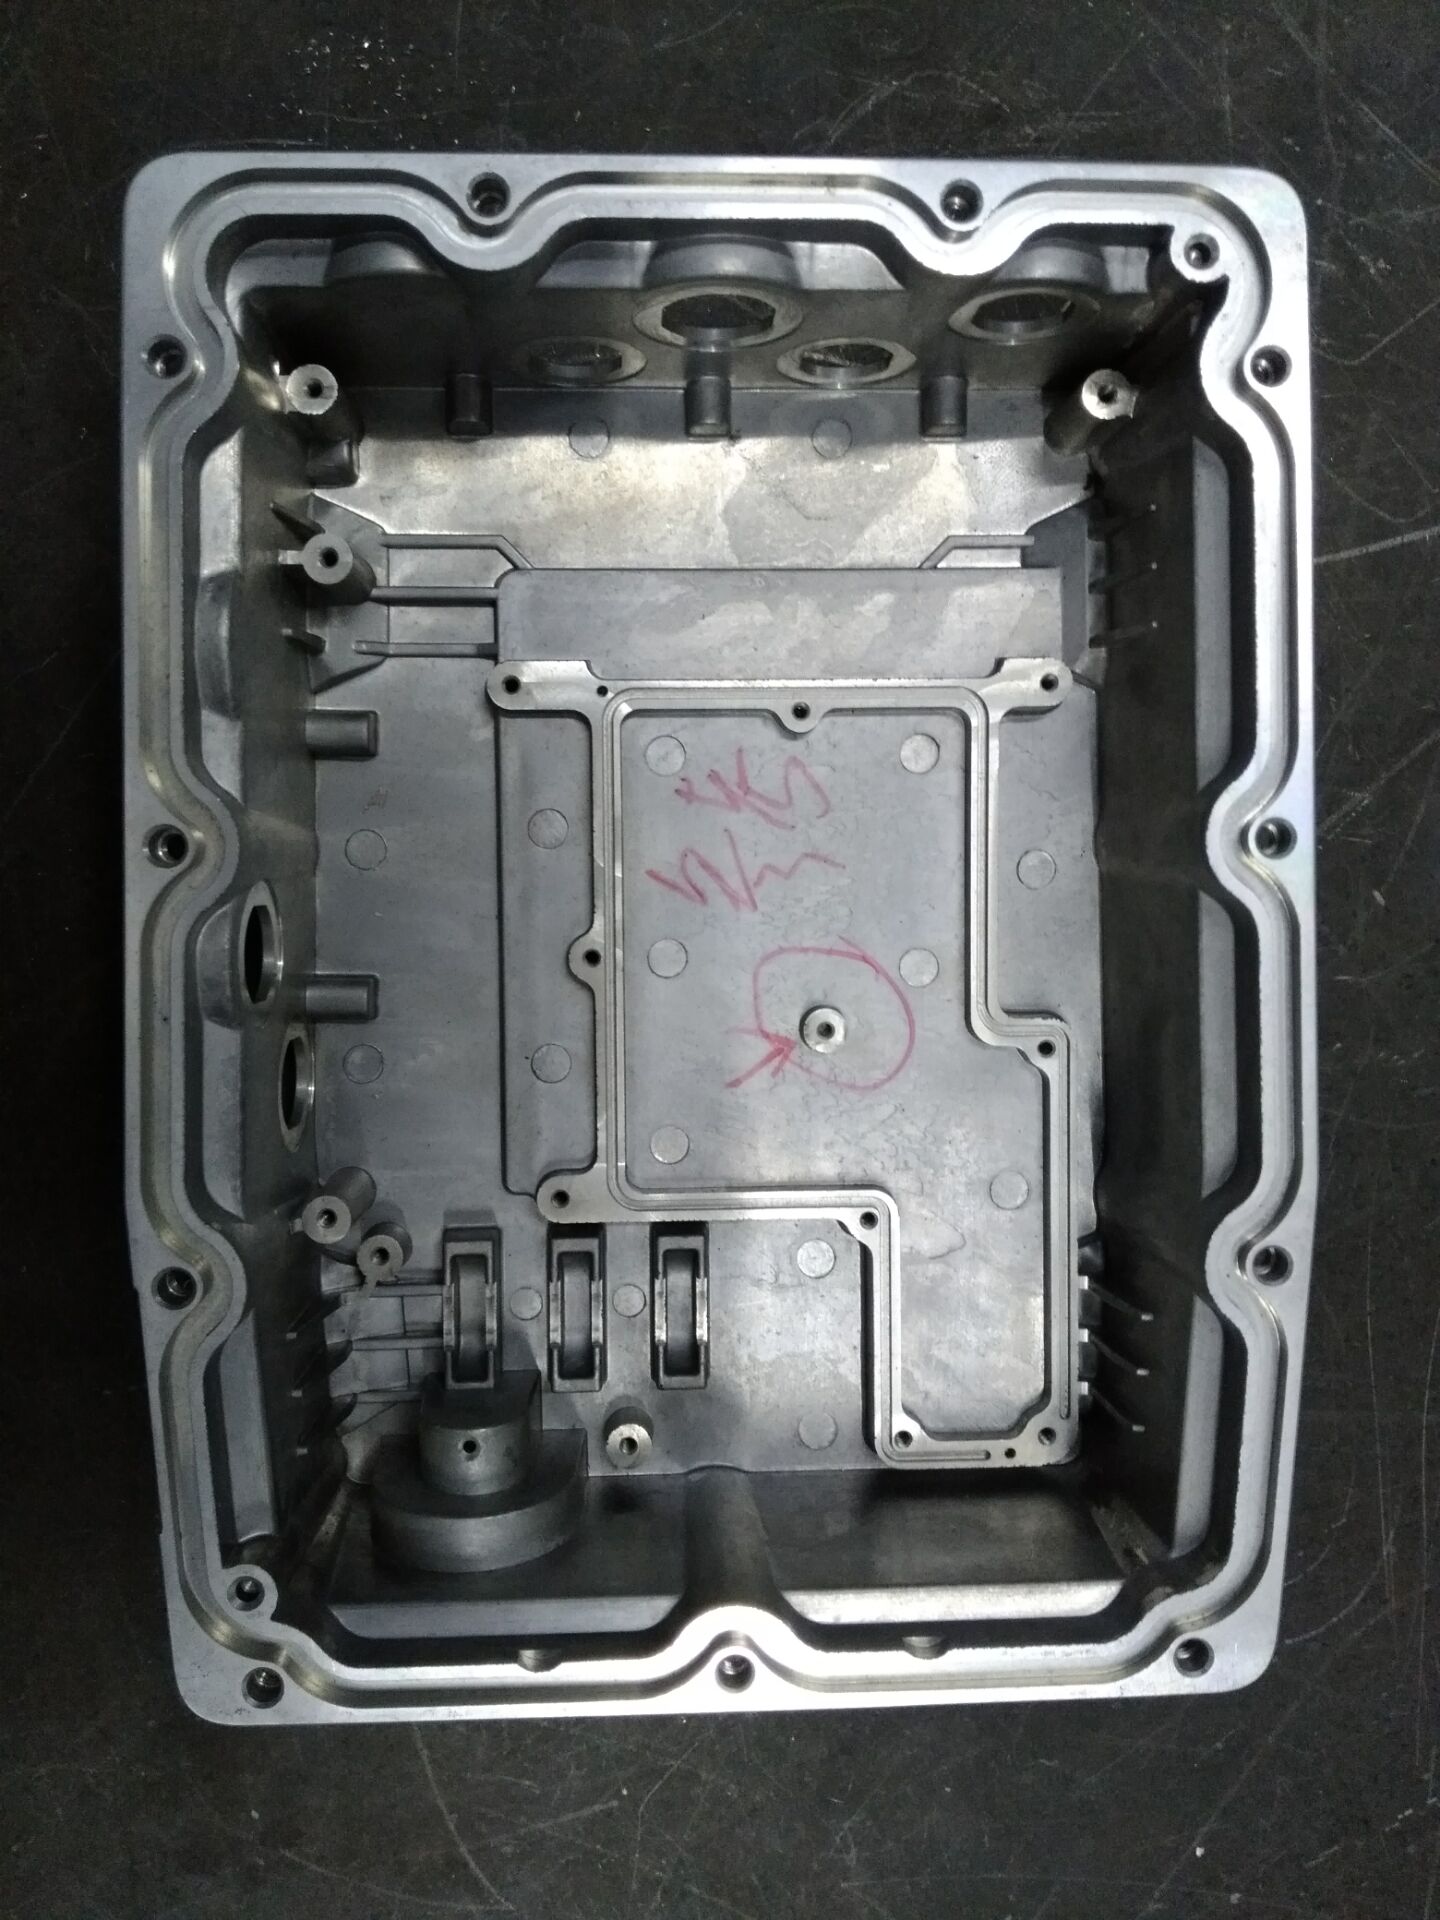 Can dml plastic mould company produce large quantities of molds?